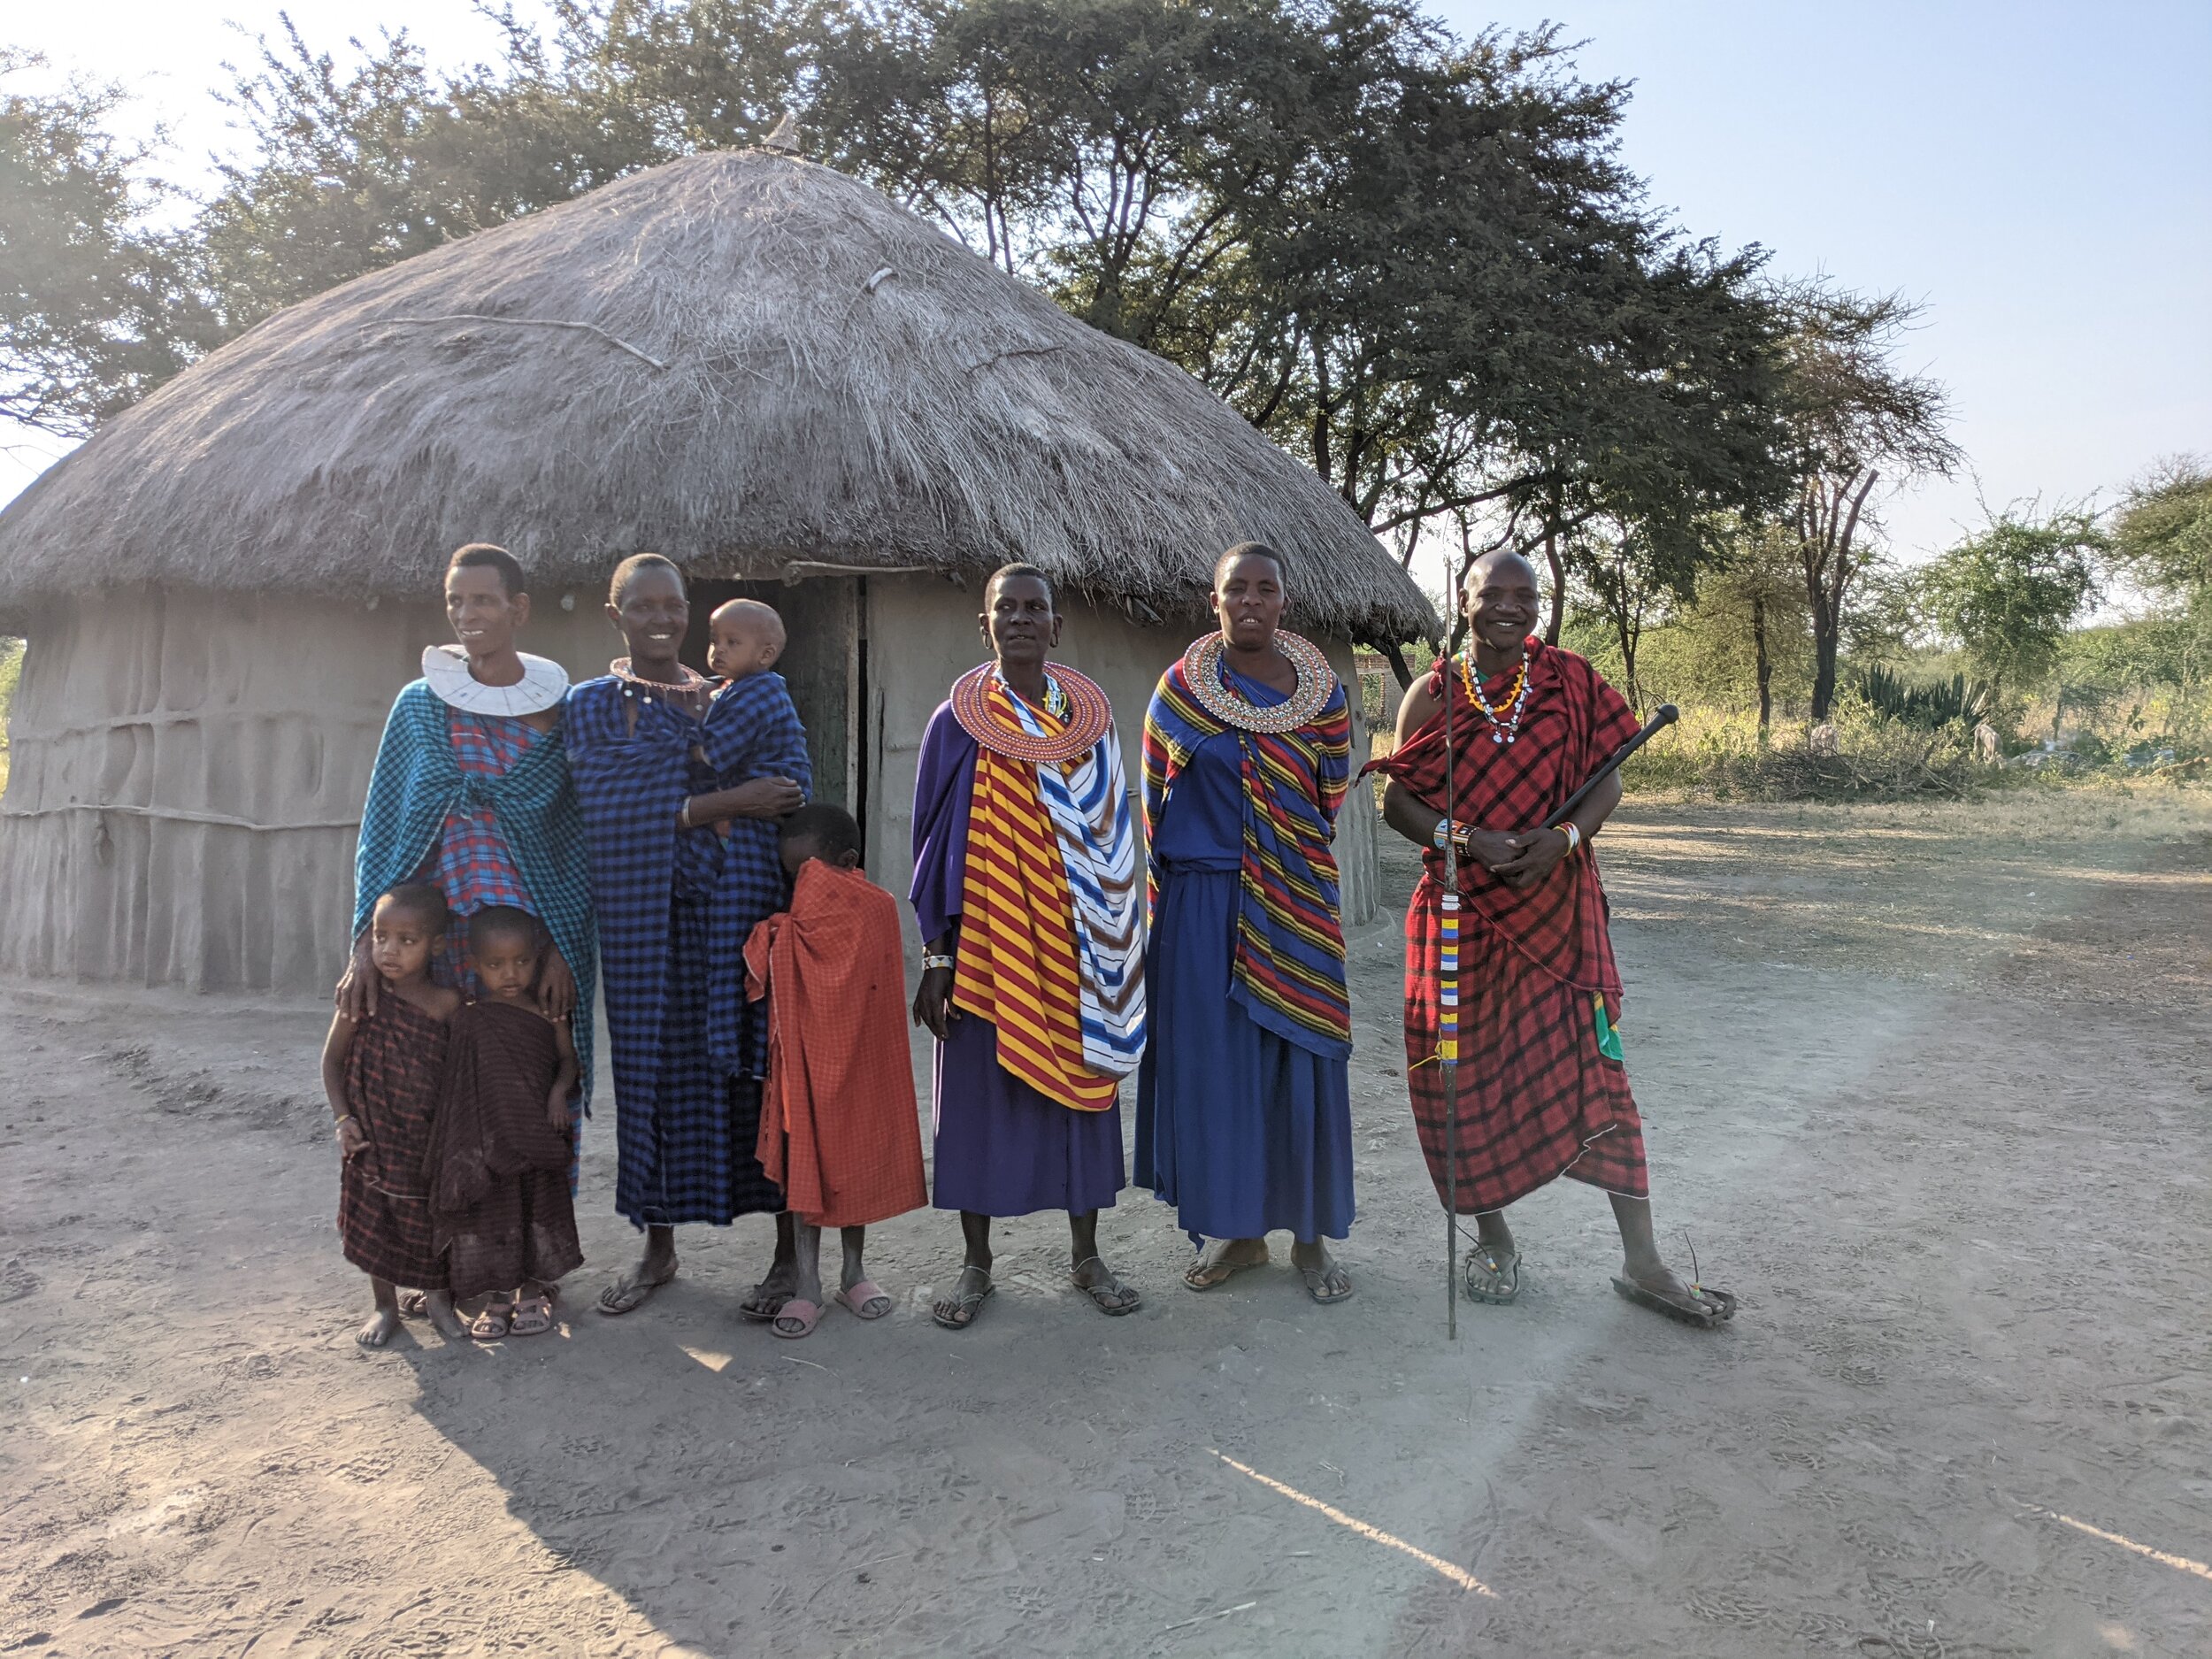  The local Maasai chief’s son and heir with his lovely family 